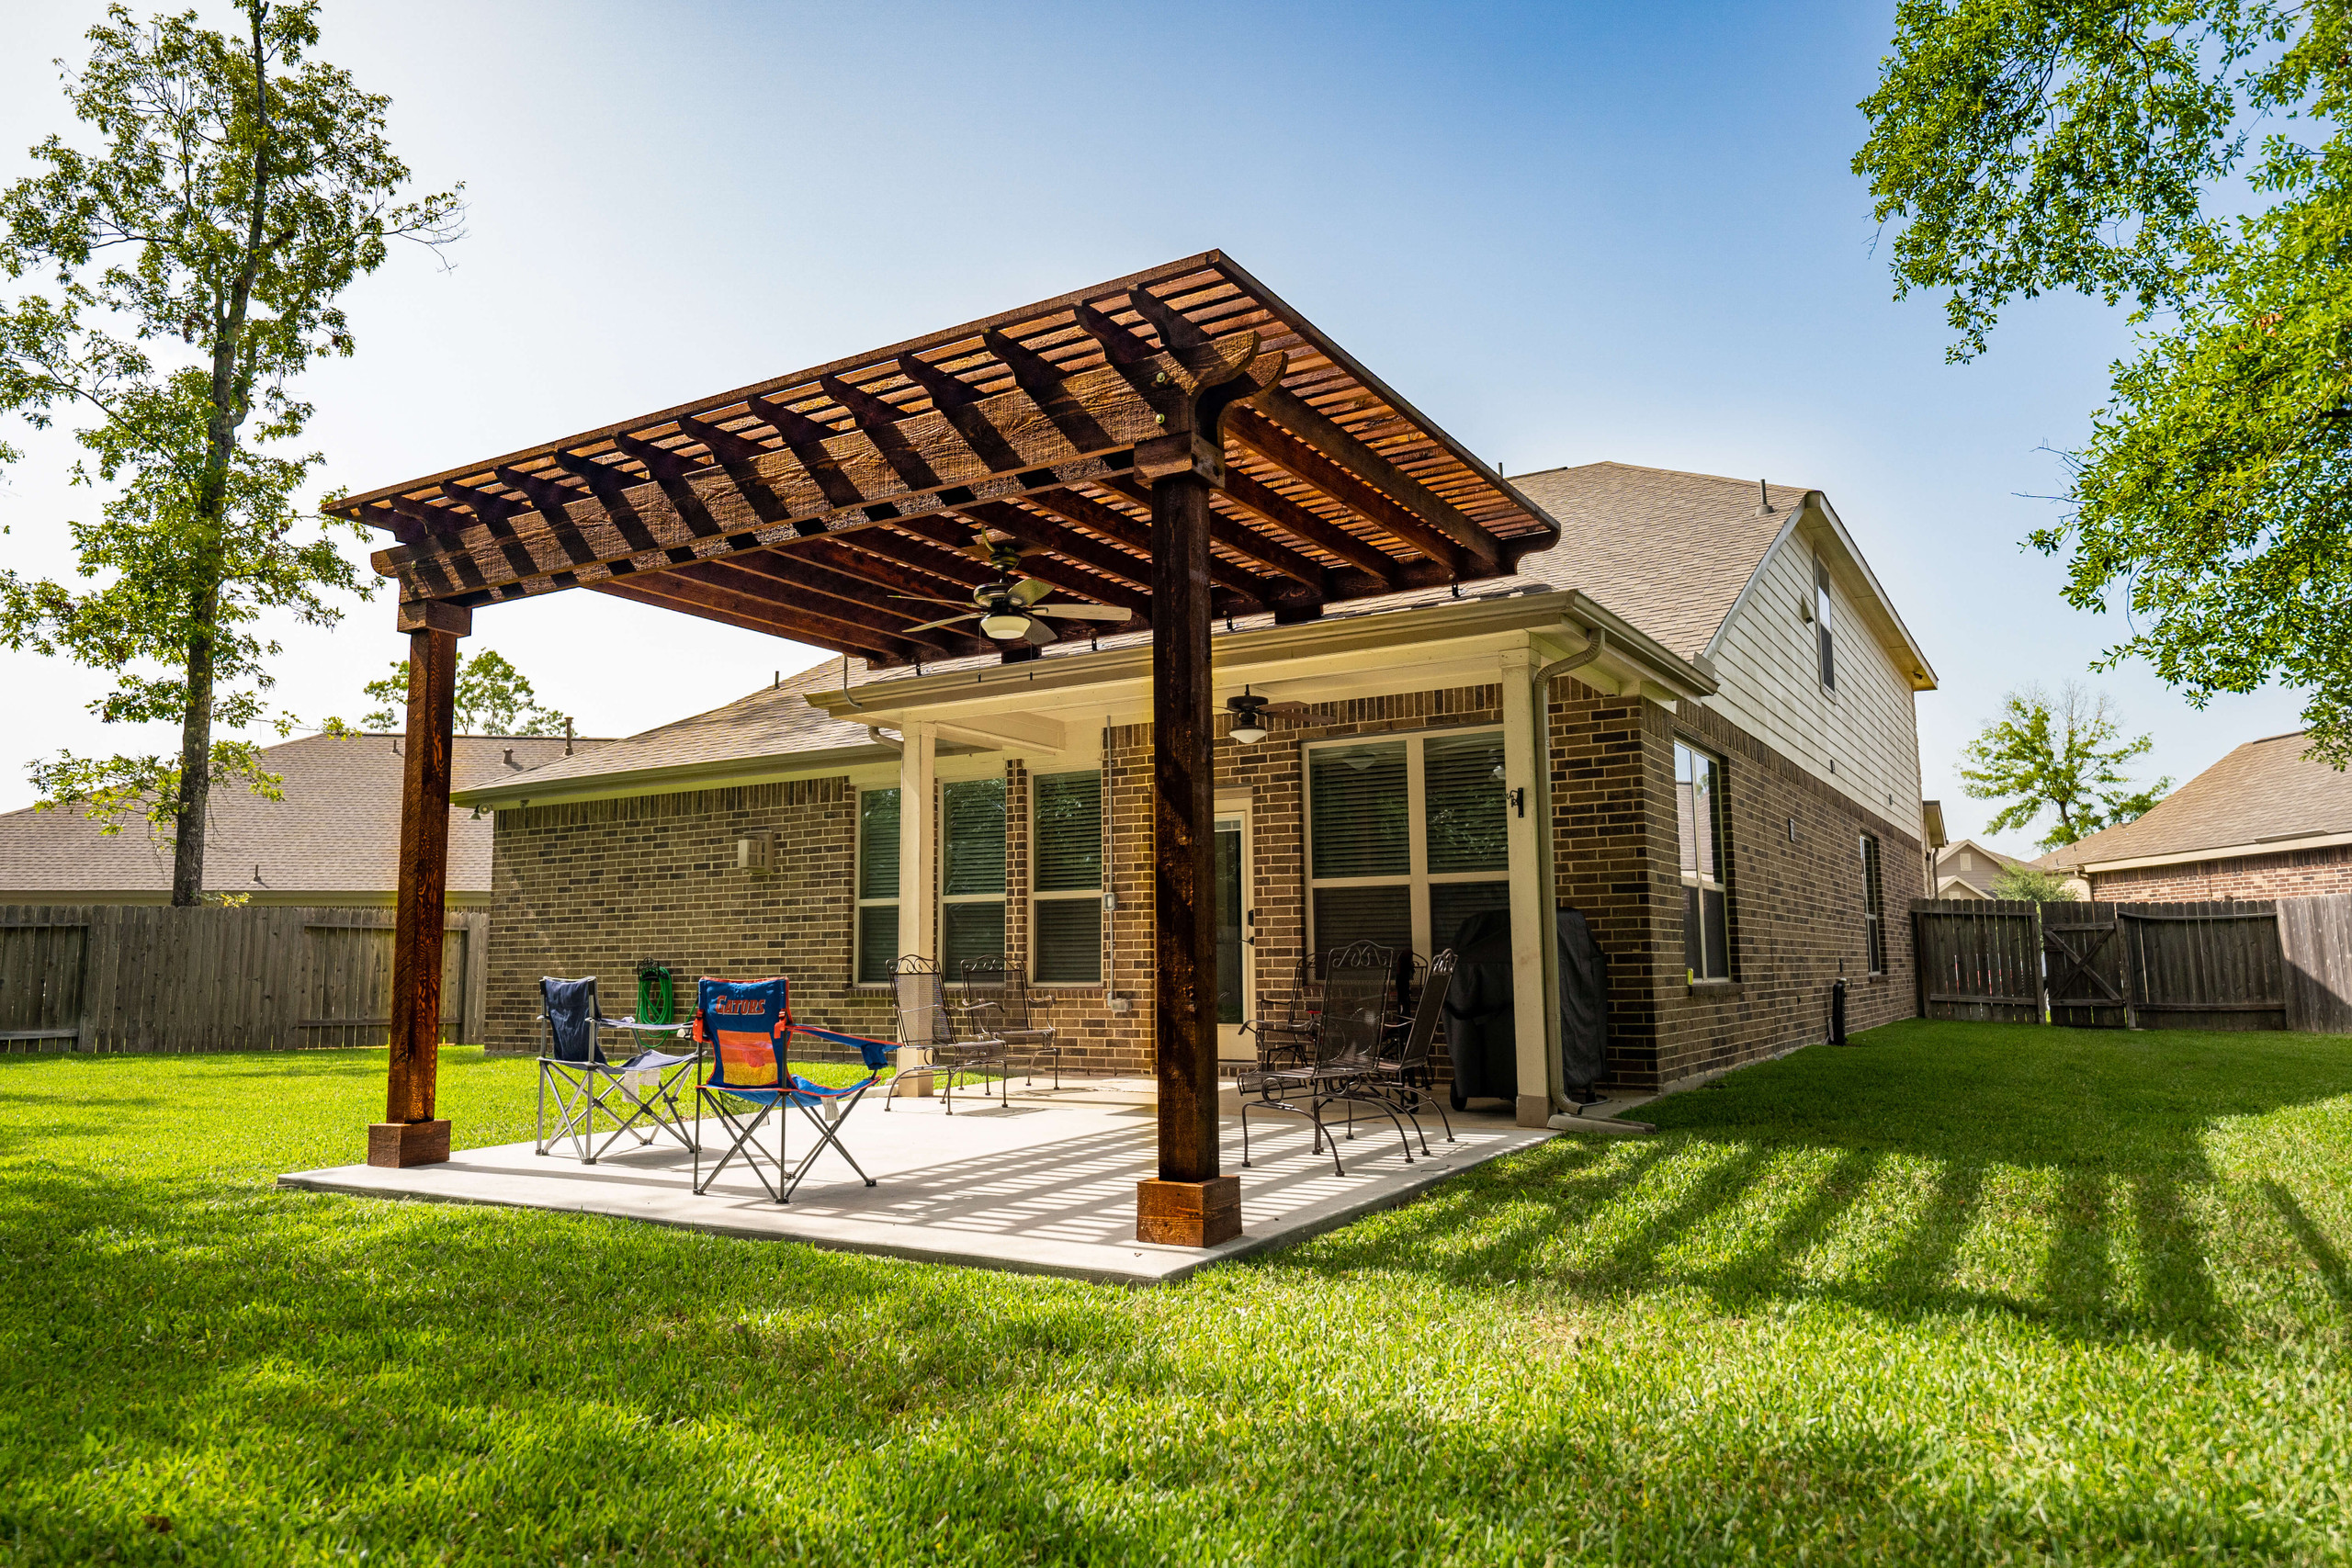 Pergola extension built for partial shade in backyard